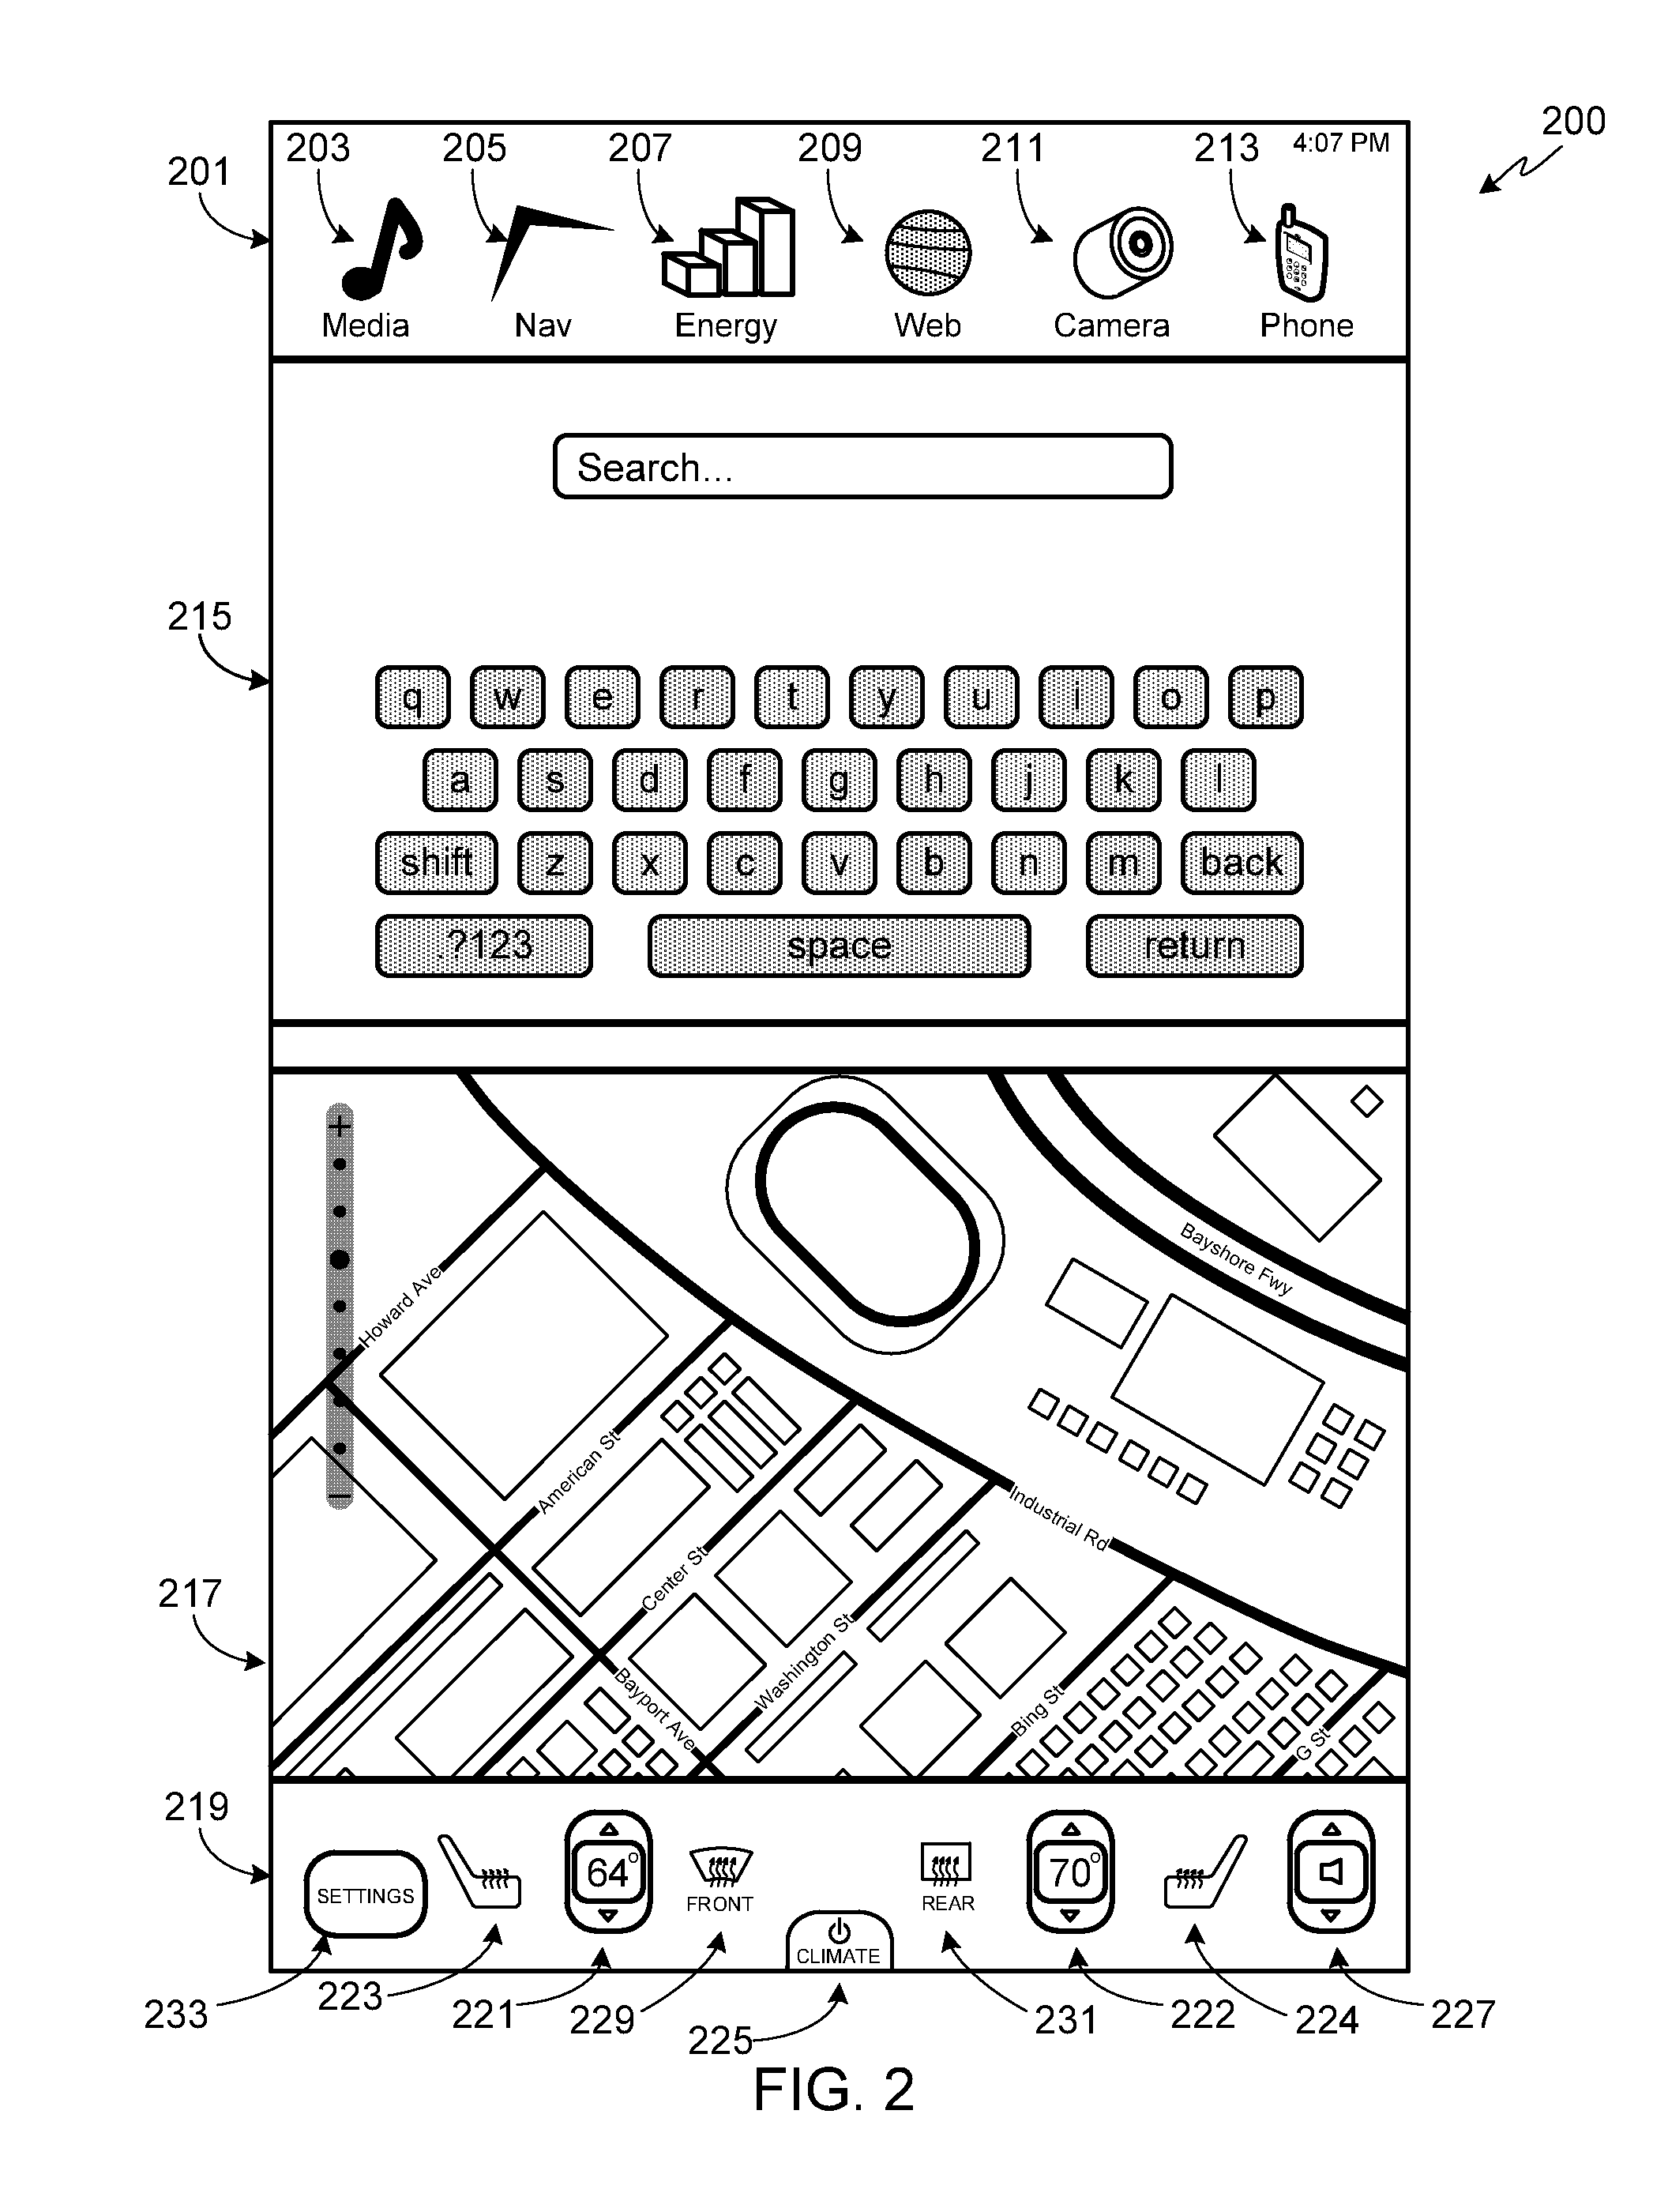 Method of Launching an Application and Selecting the Application Target Window